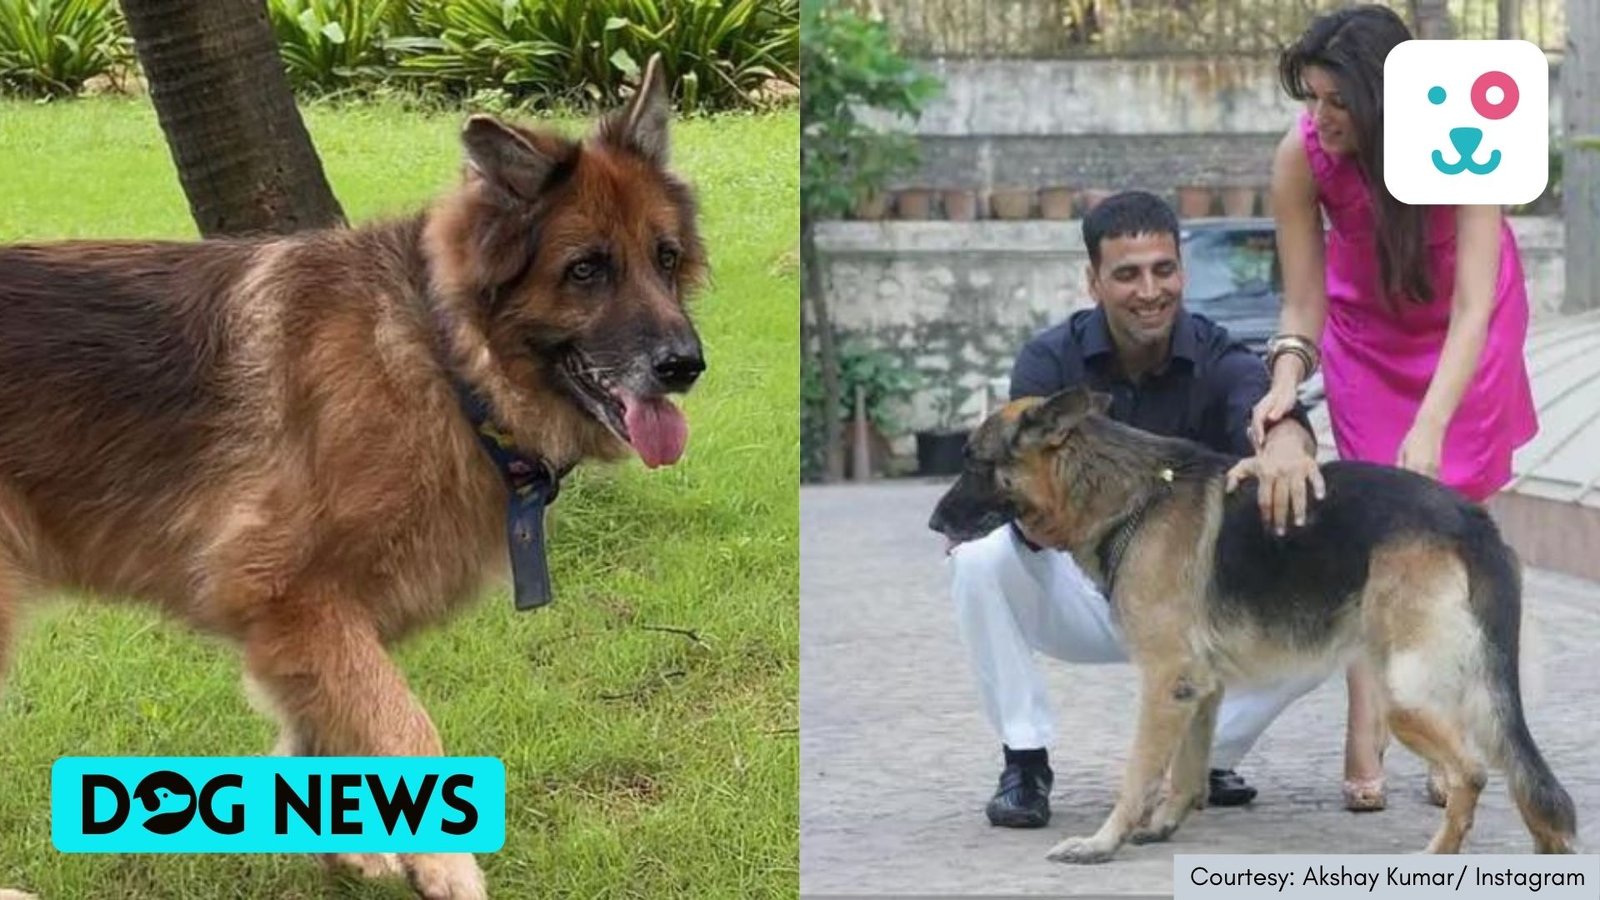 Twinkle Khanna loses pet dog Cleo, says her heart feels 'heavy and empty' at same time